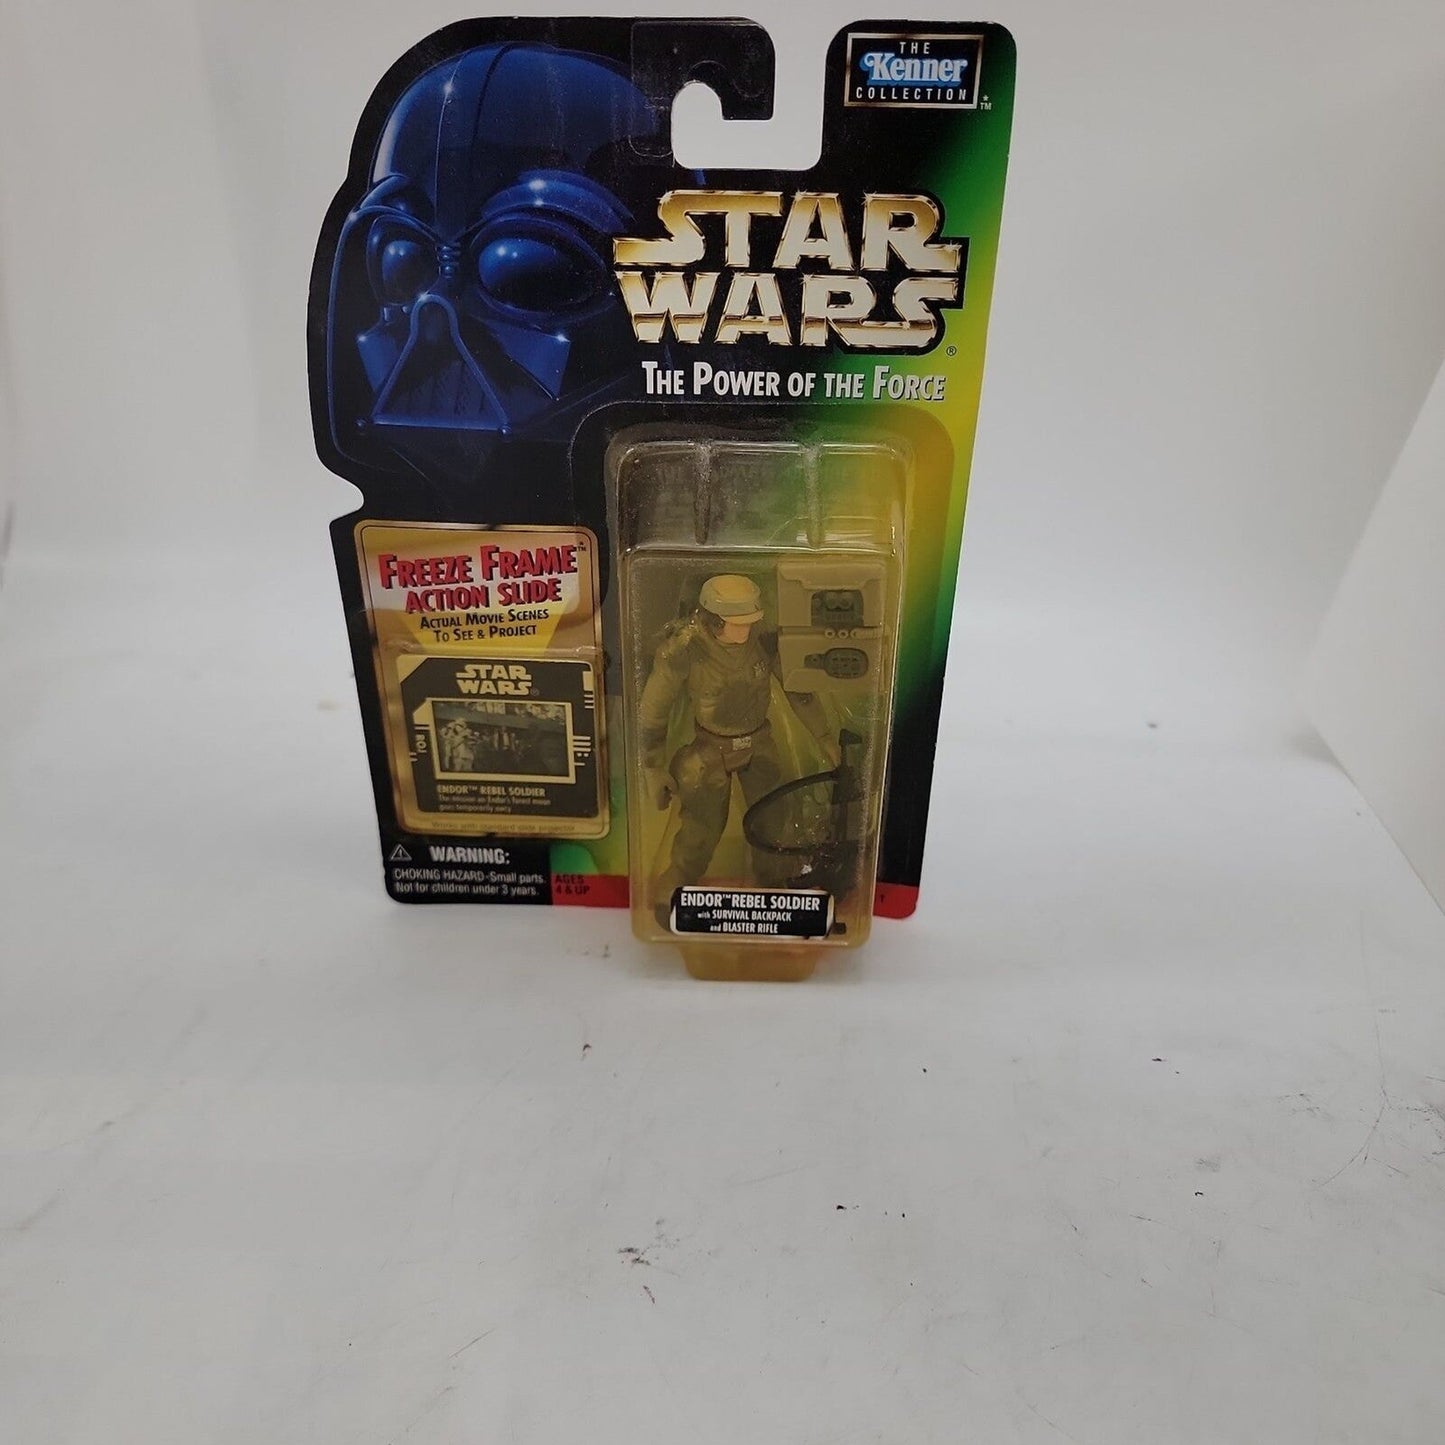 Star Wars The Power of the Force Endor Rebel Soldier